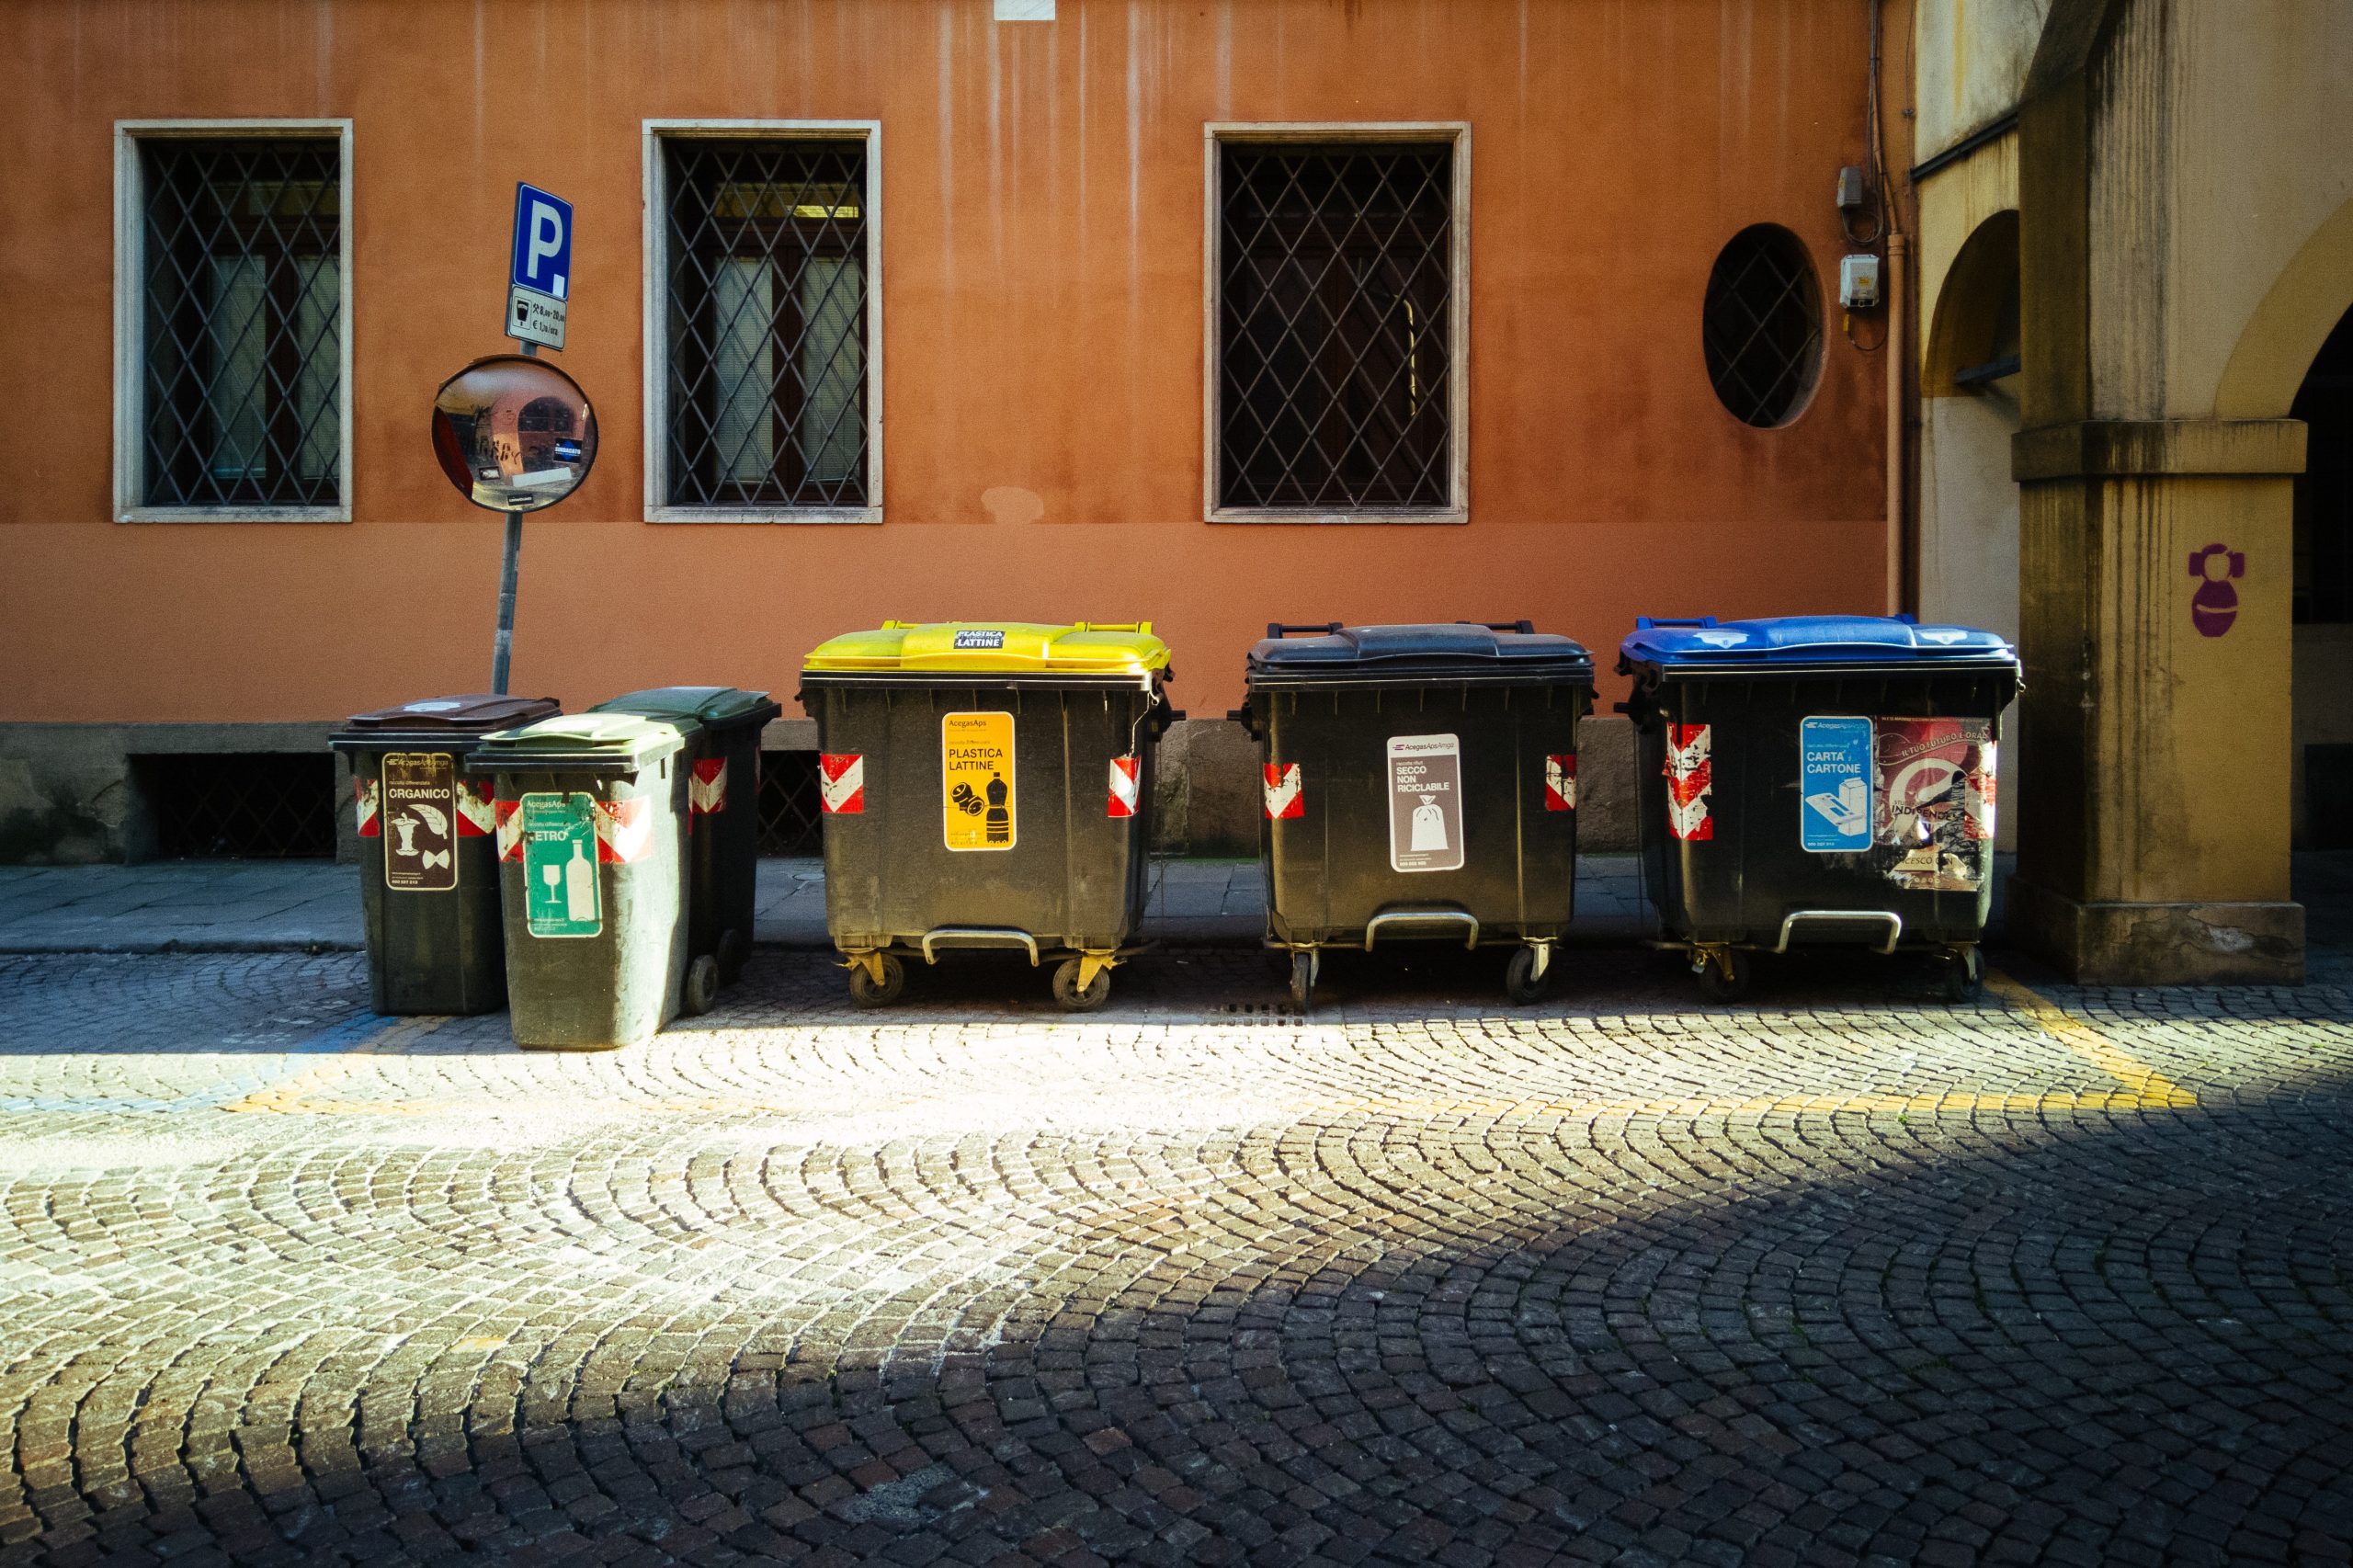 Trash and recycling bins lined up on the side of the building